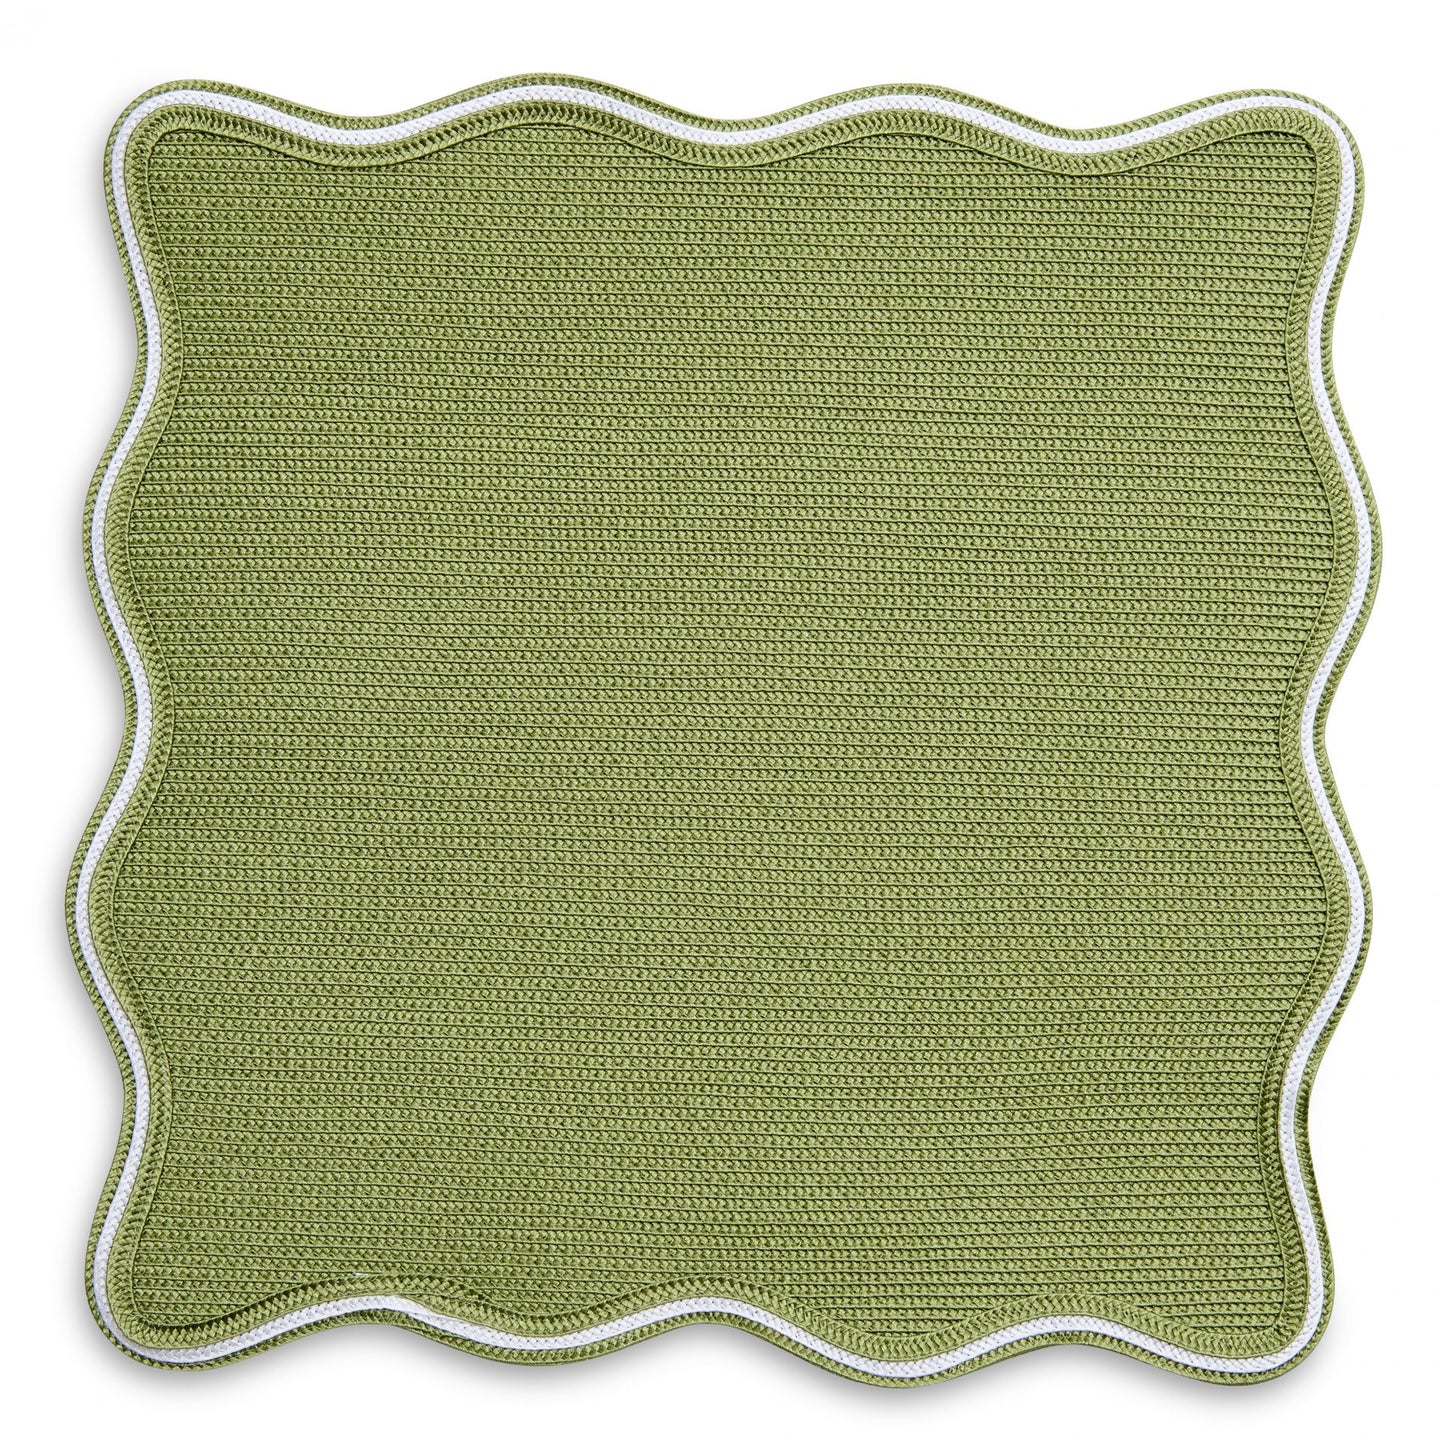 Piped Bermuda Placemat 14" Set of 2